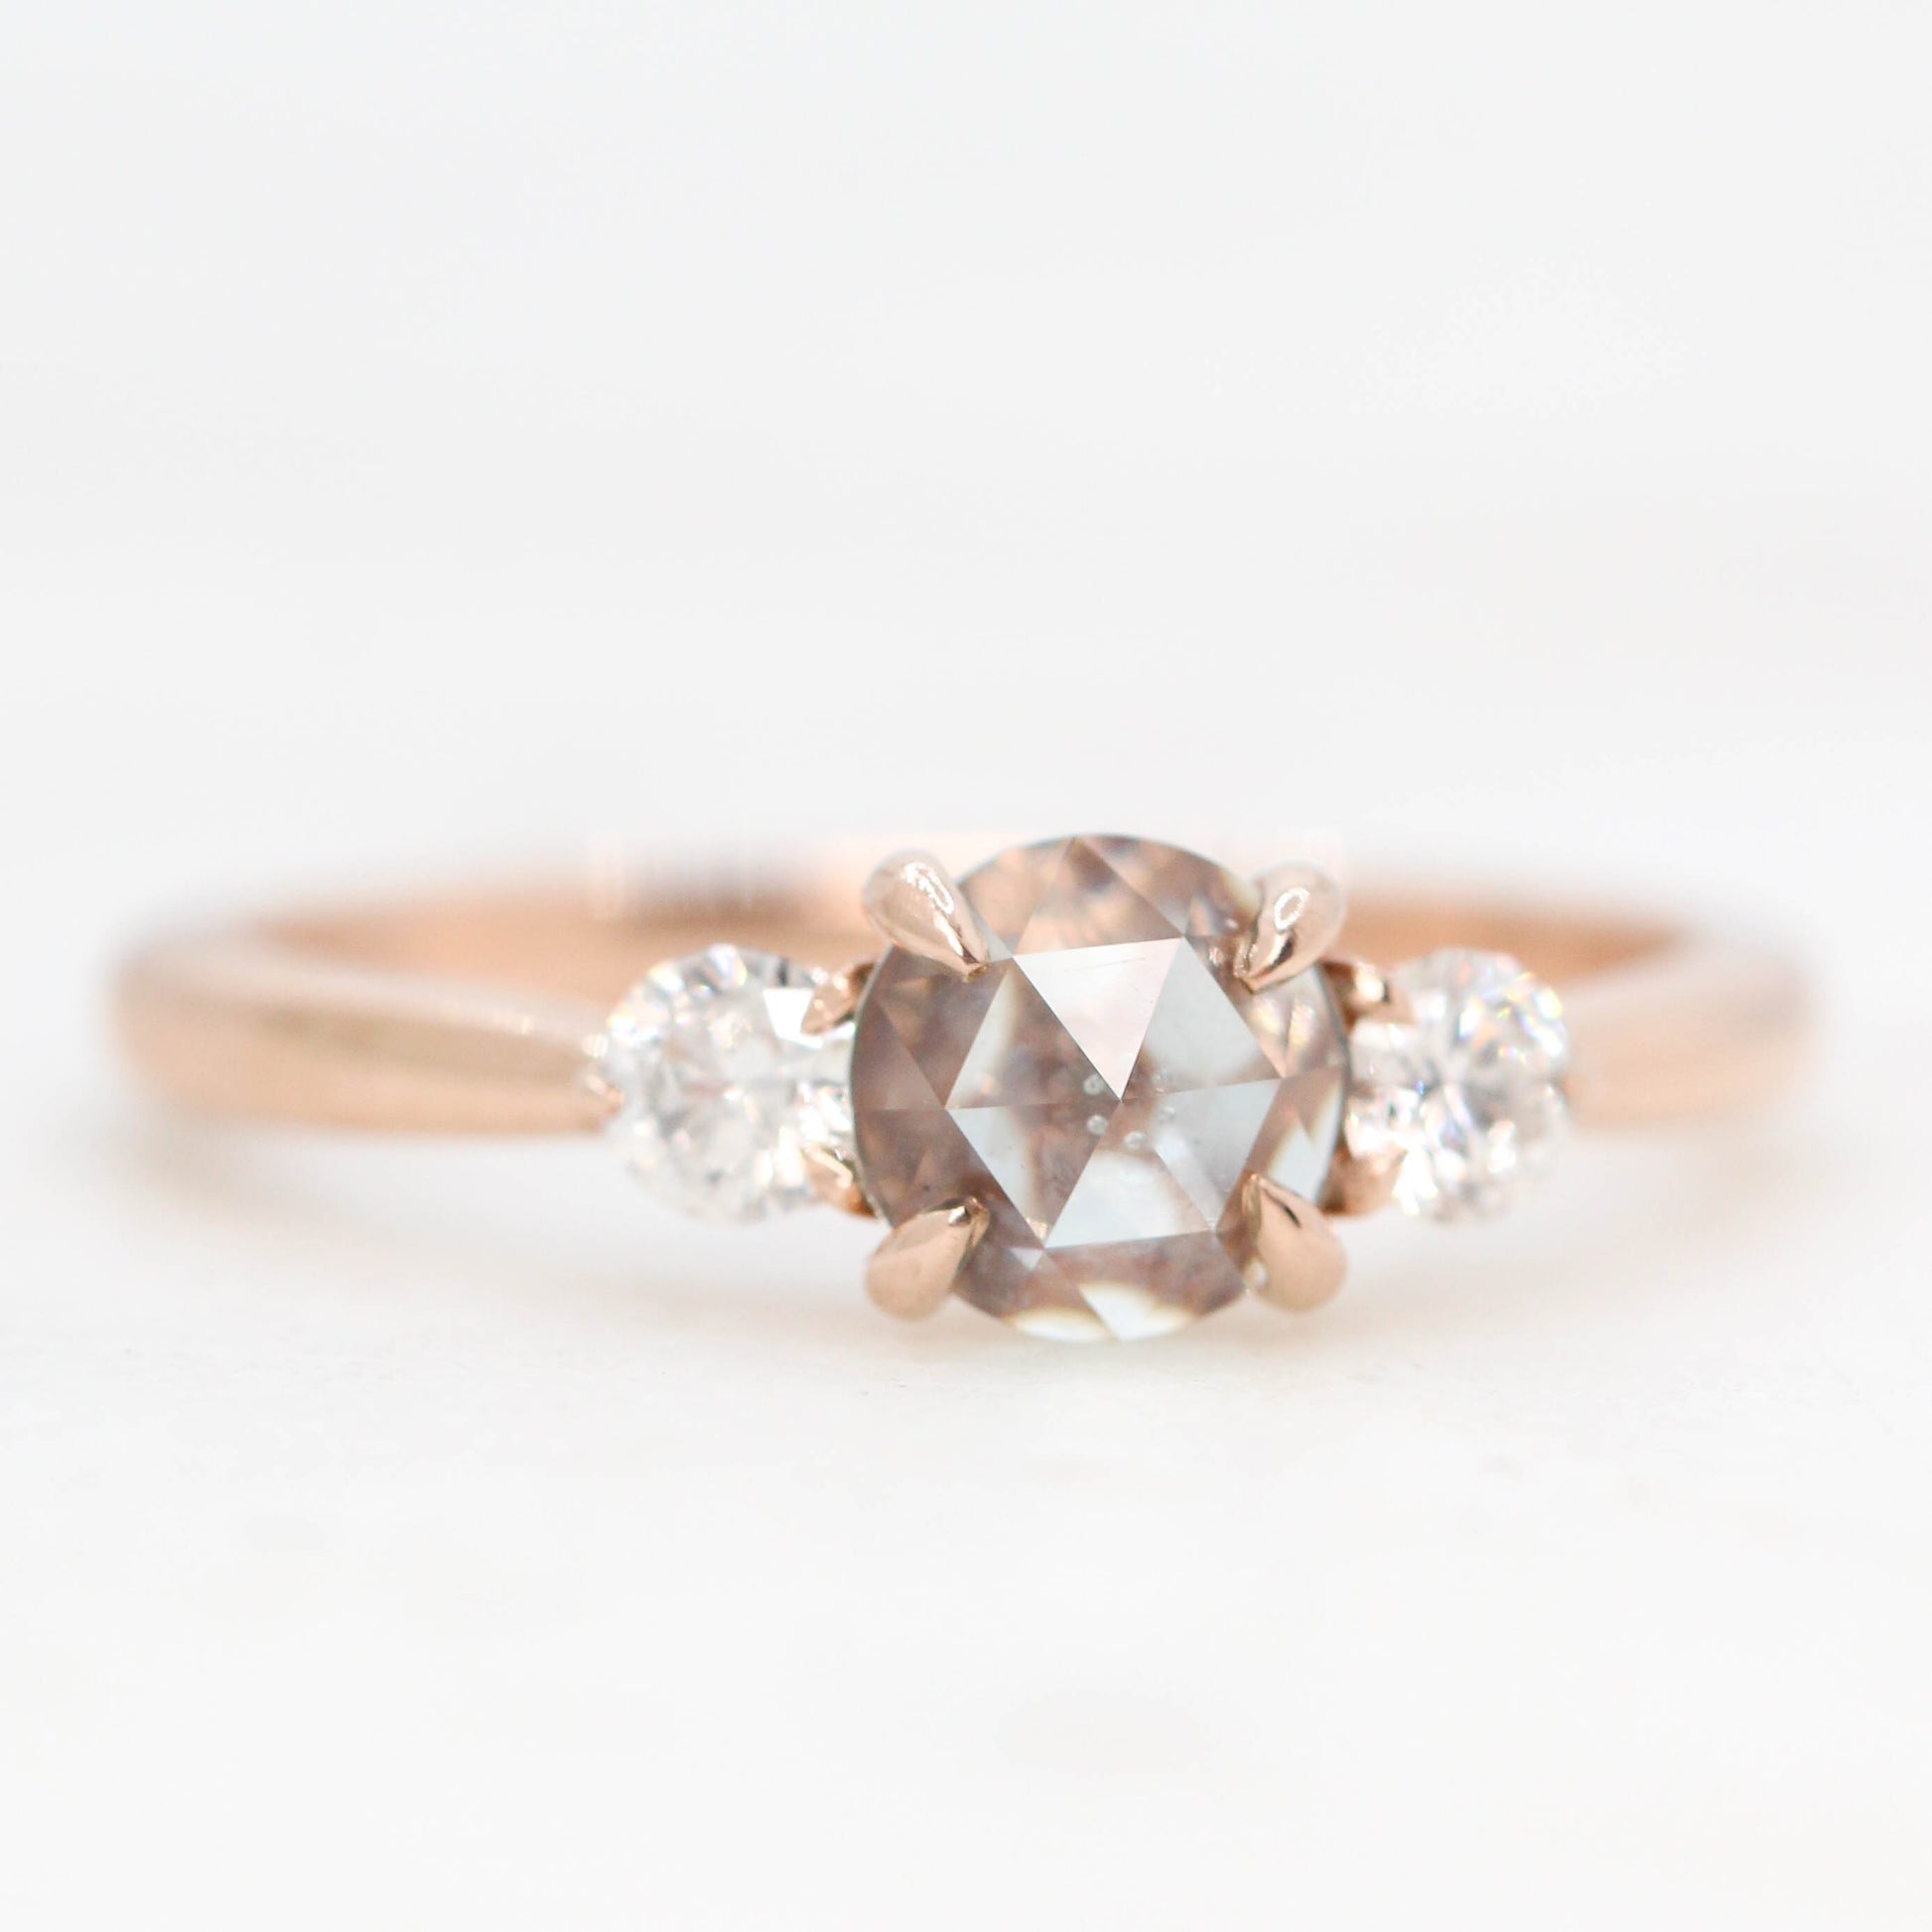 Olive Ring with a 0.82 Carat Light Blue Round Sapphire and White Diamond Accents in 10k Rose Gold - Ready to Size and Ship - Midwinter Co. Alternative Bridal Rings and Modern Fine Jewelry